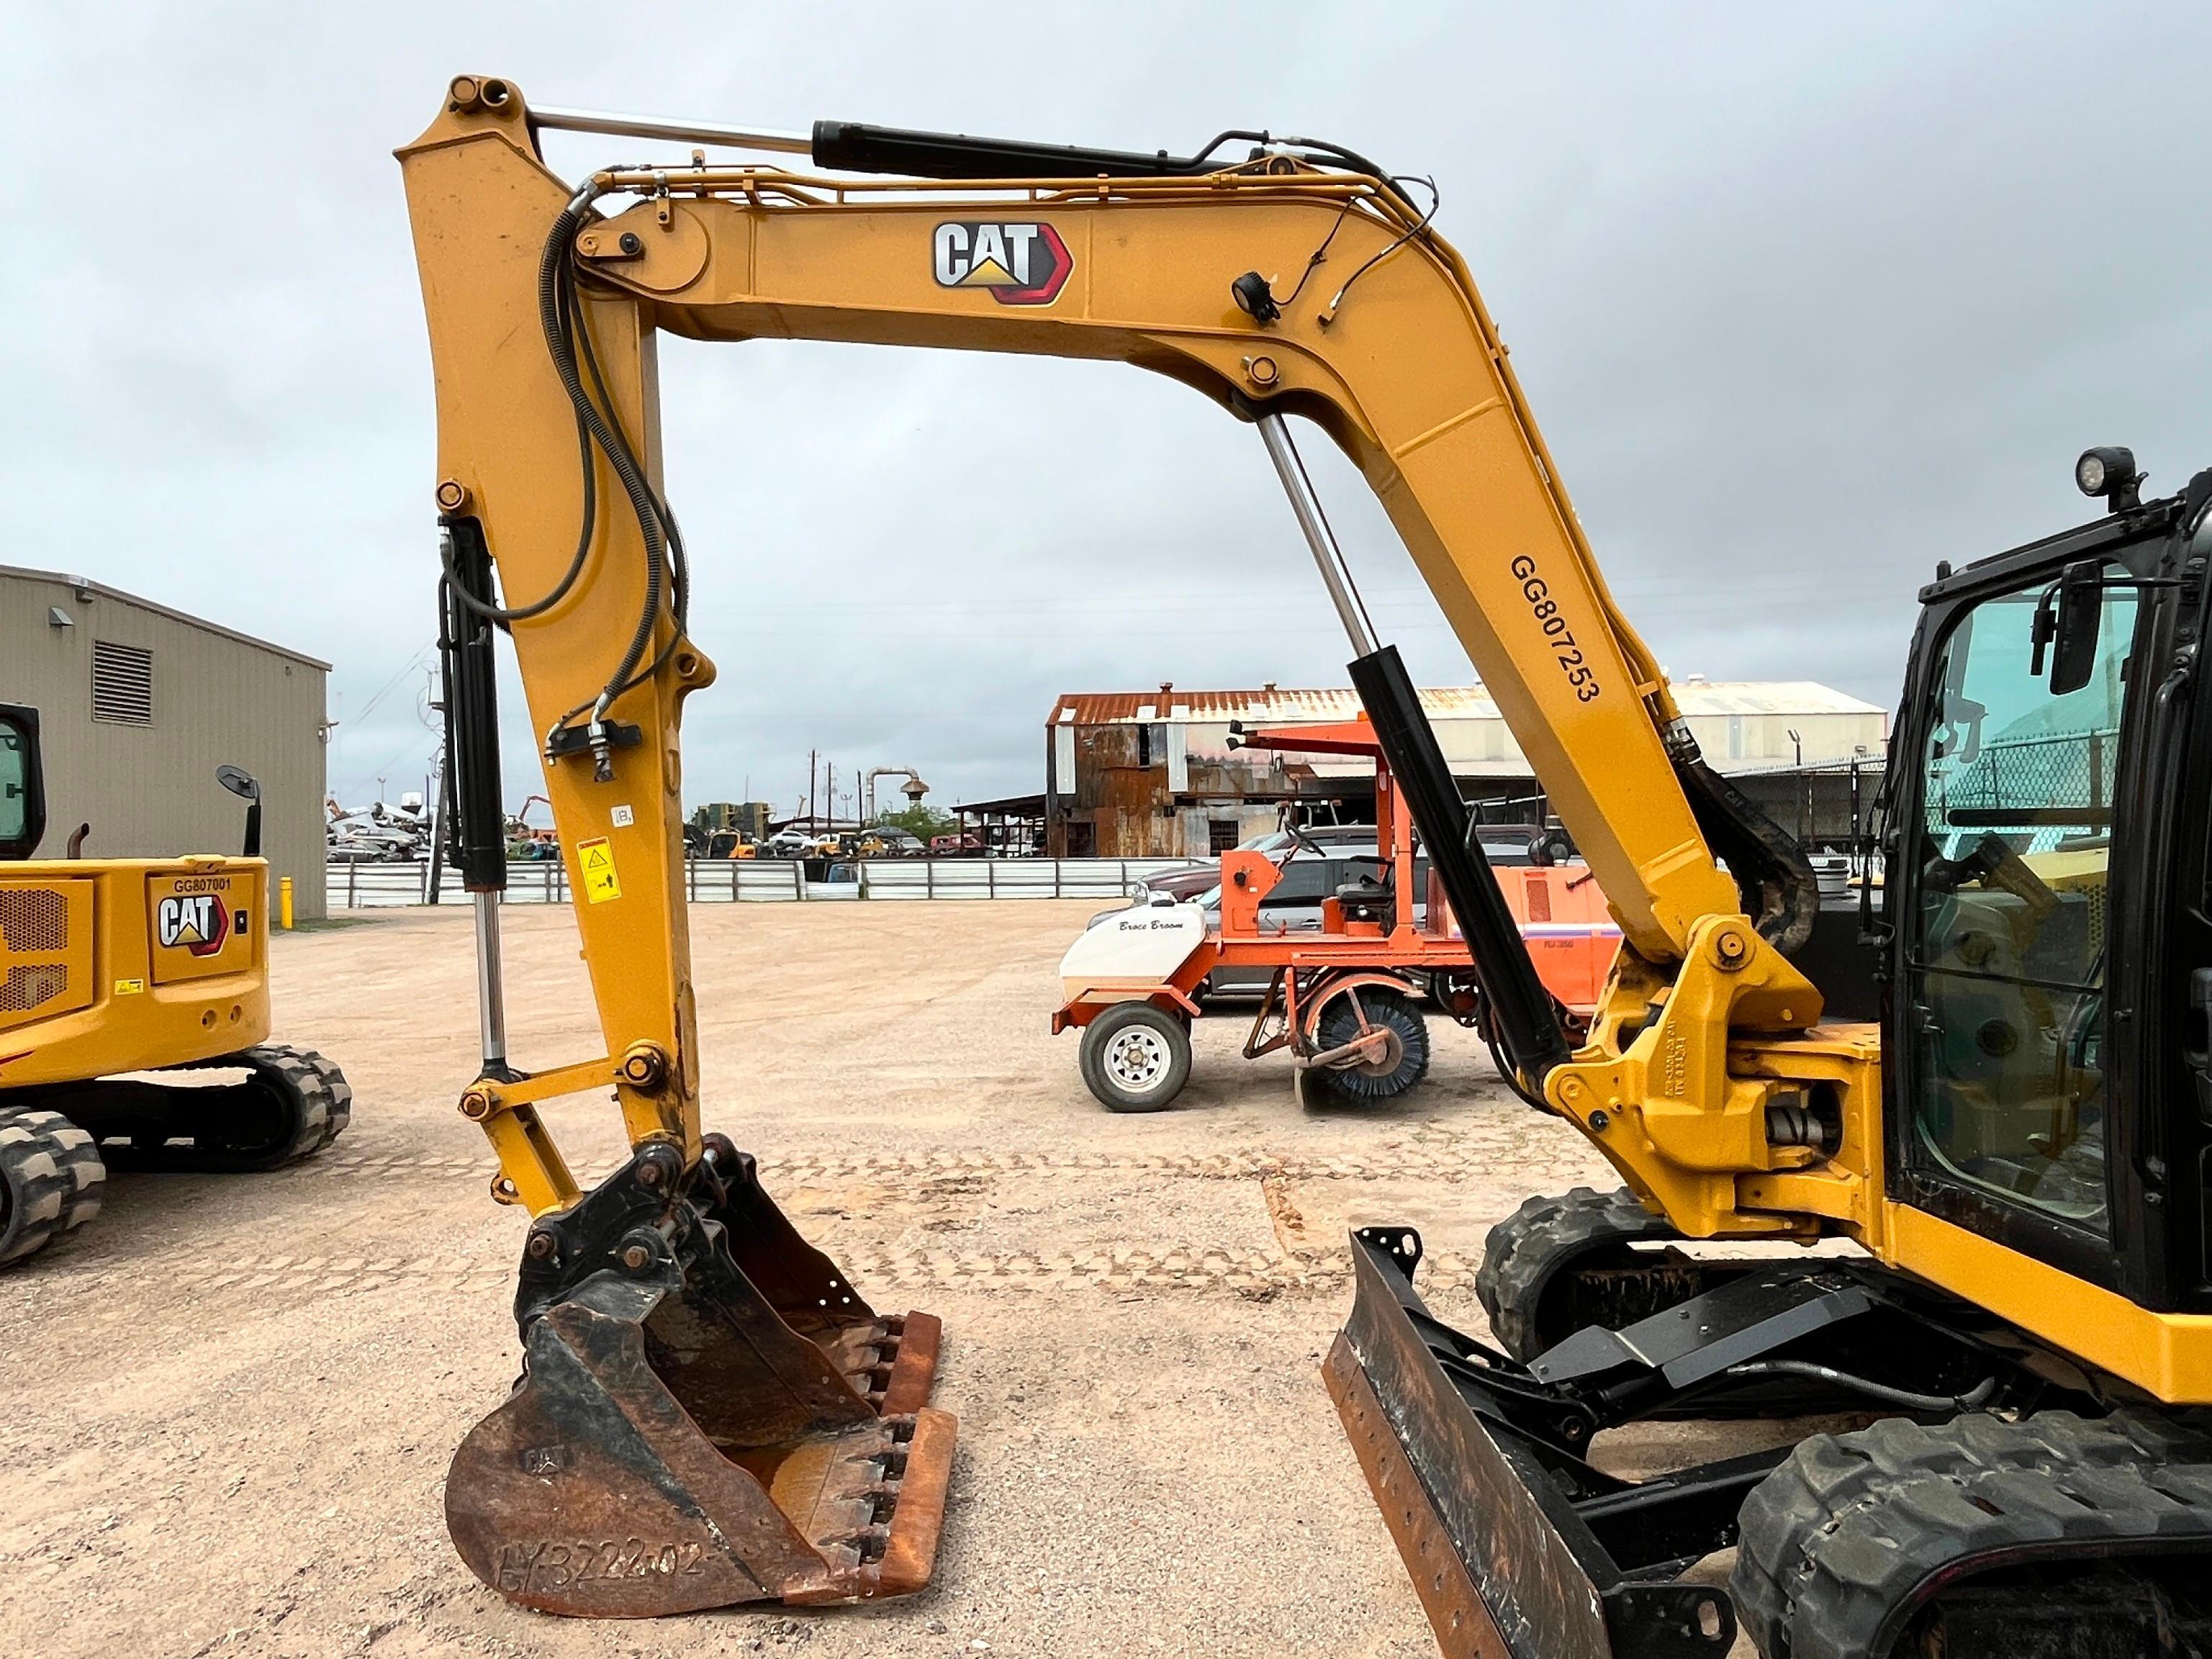 2023 CAT 308CR HYDRAULIC EXCAVATOR SN:807253 powered by Cat C3.3B diesel engine, equipped with Cab,